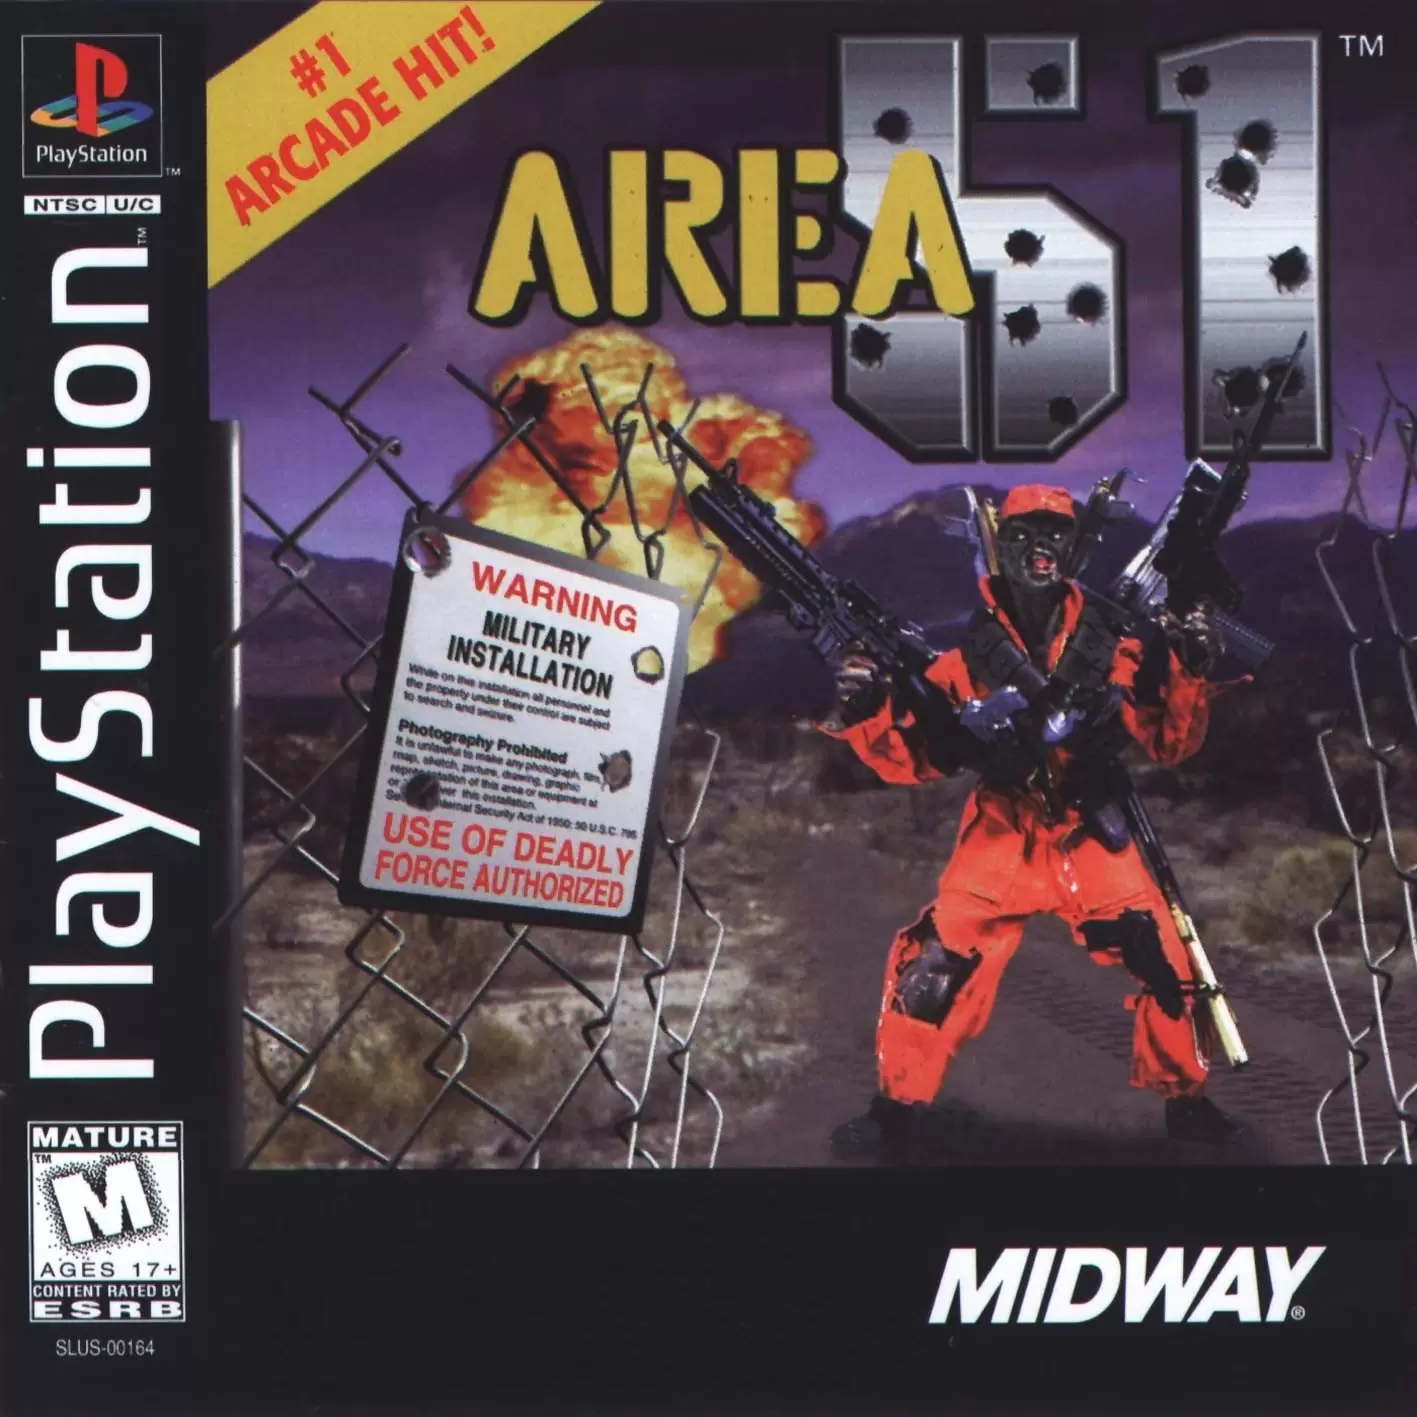 Playstation games - Area 51